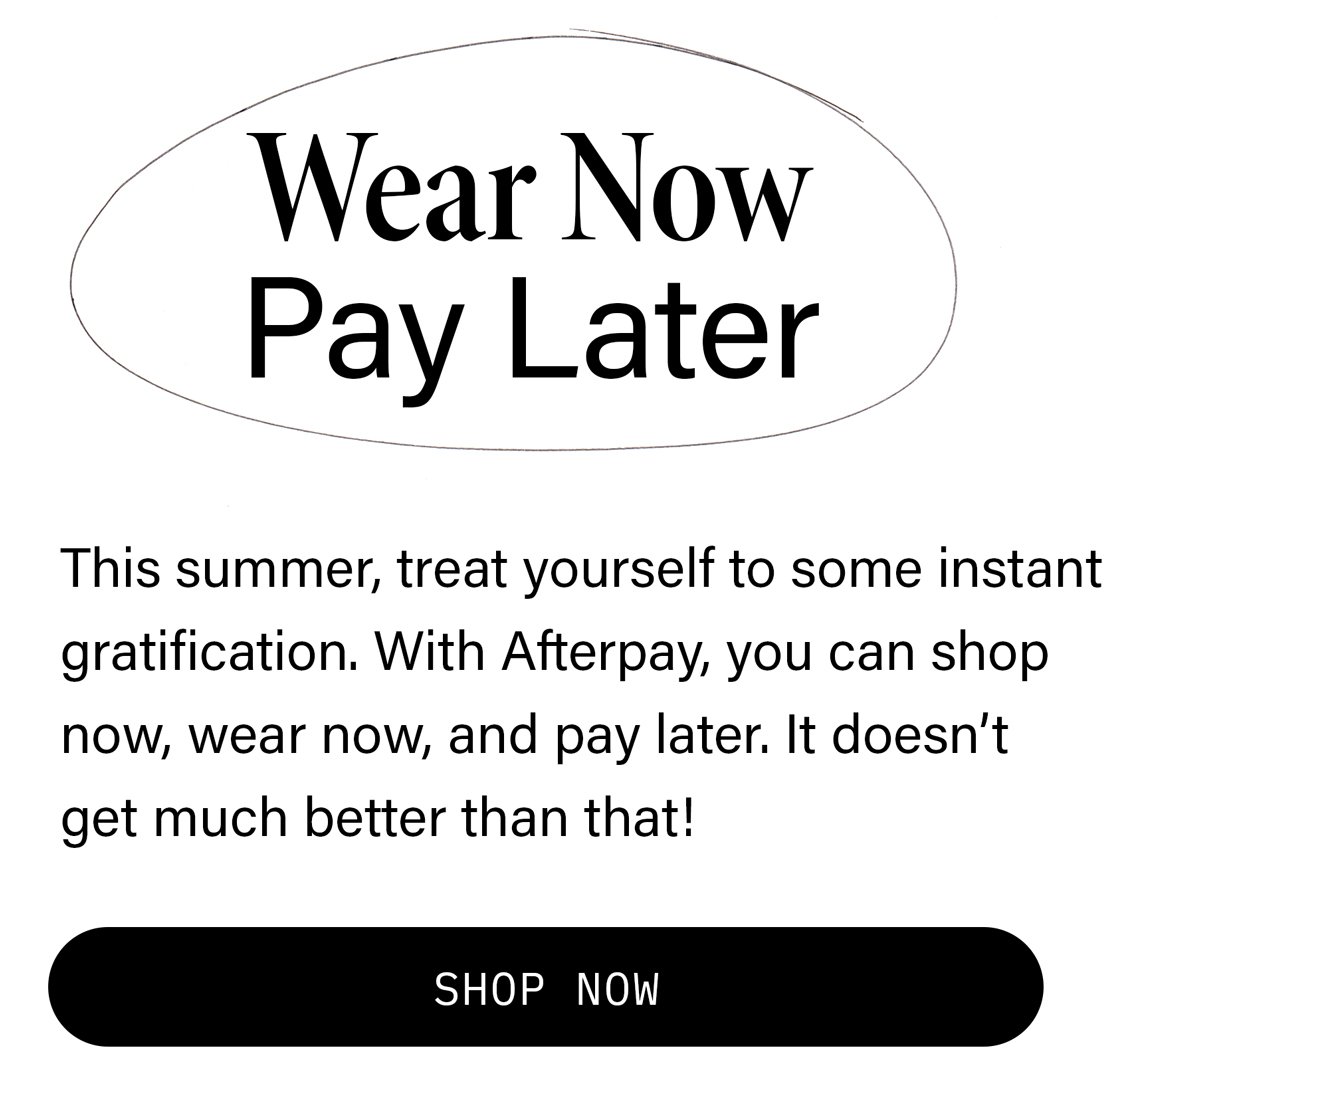 Wear Now, Pay Later